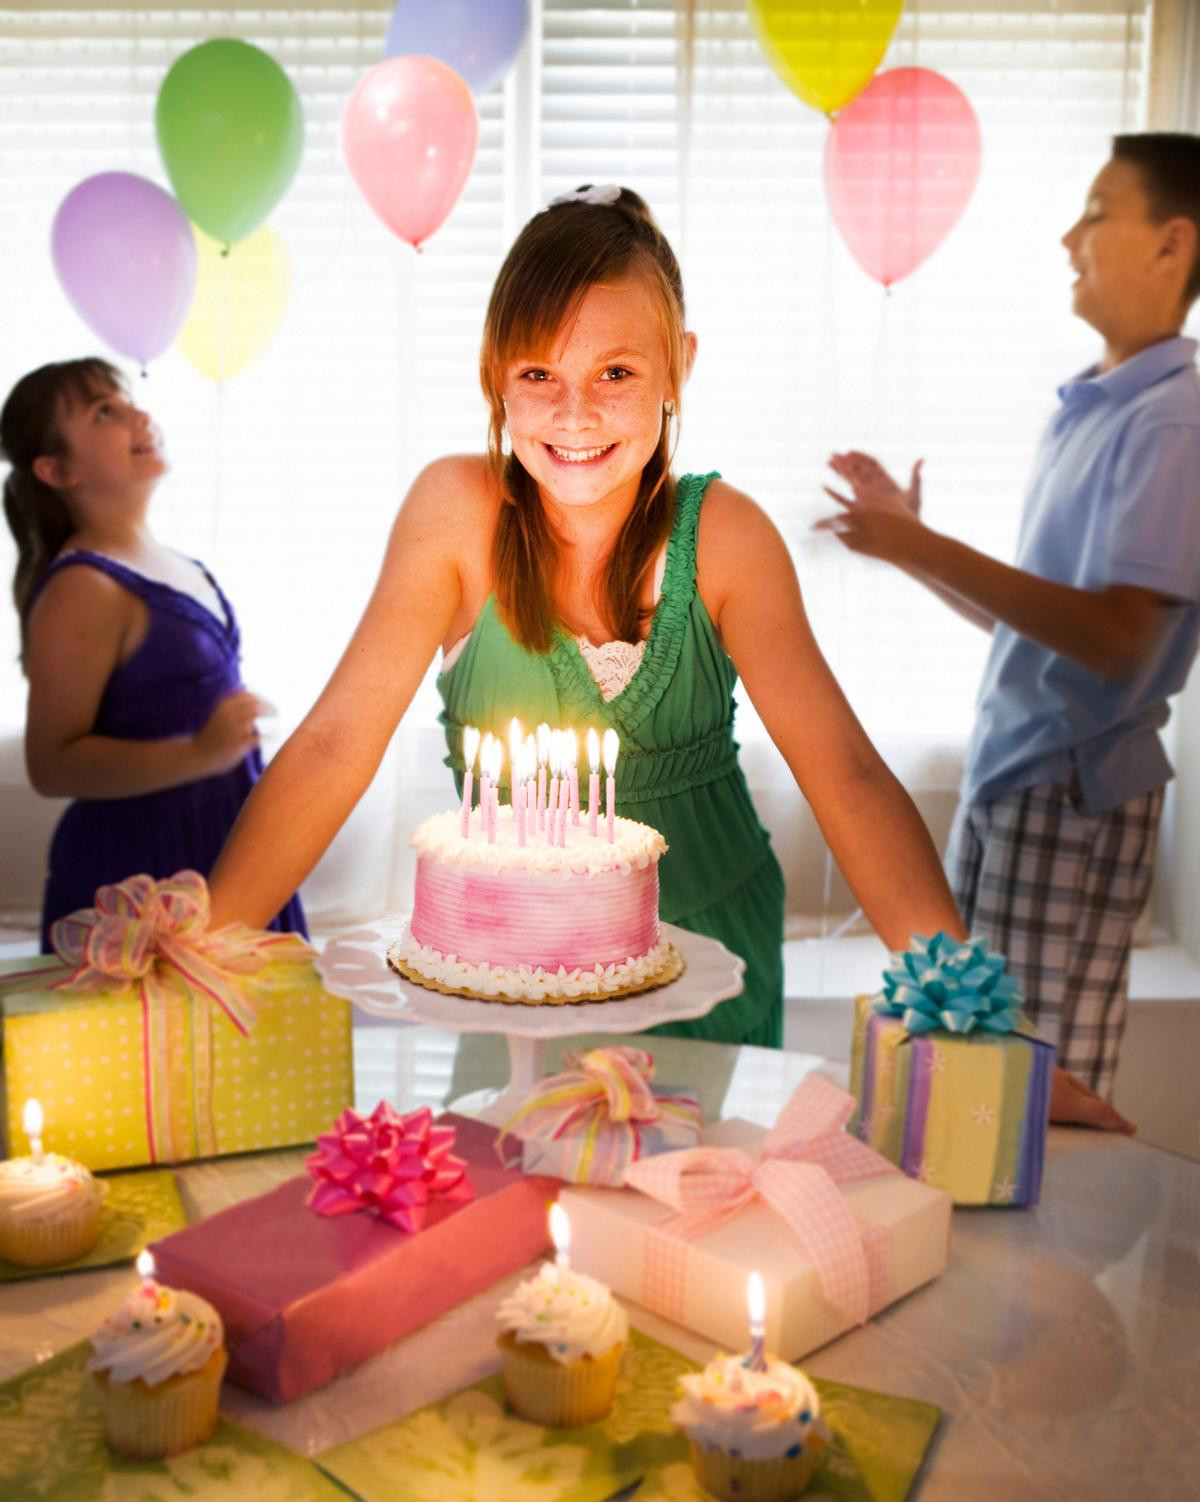 13 Year Old Girl Birthday Gift Ideas
 Party Ideas for 13 year old Girls Birthday Frenzy